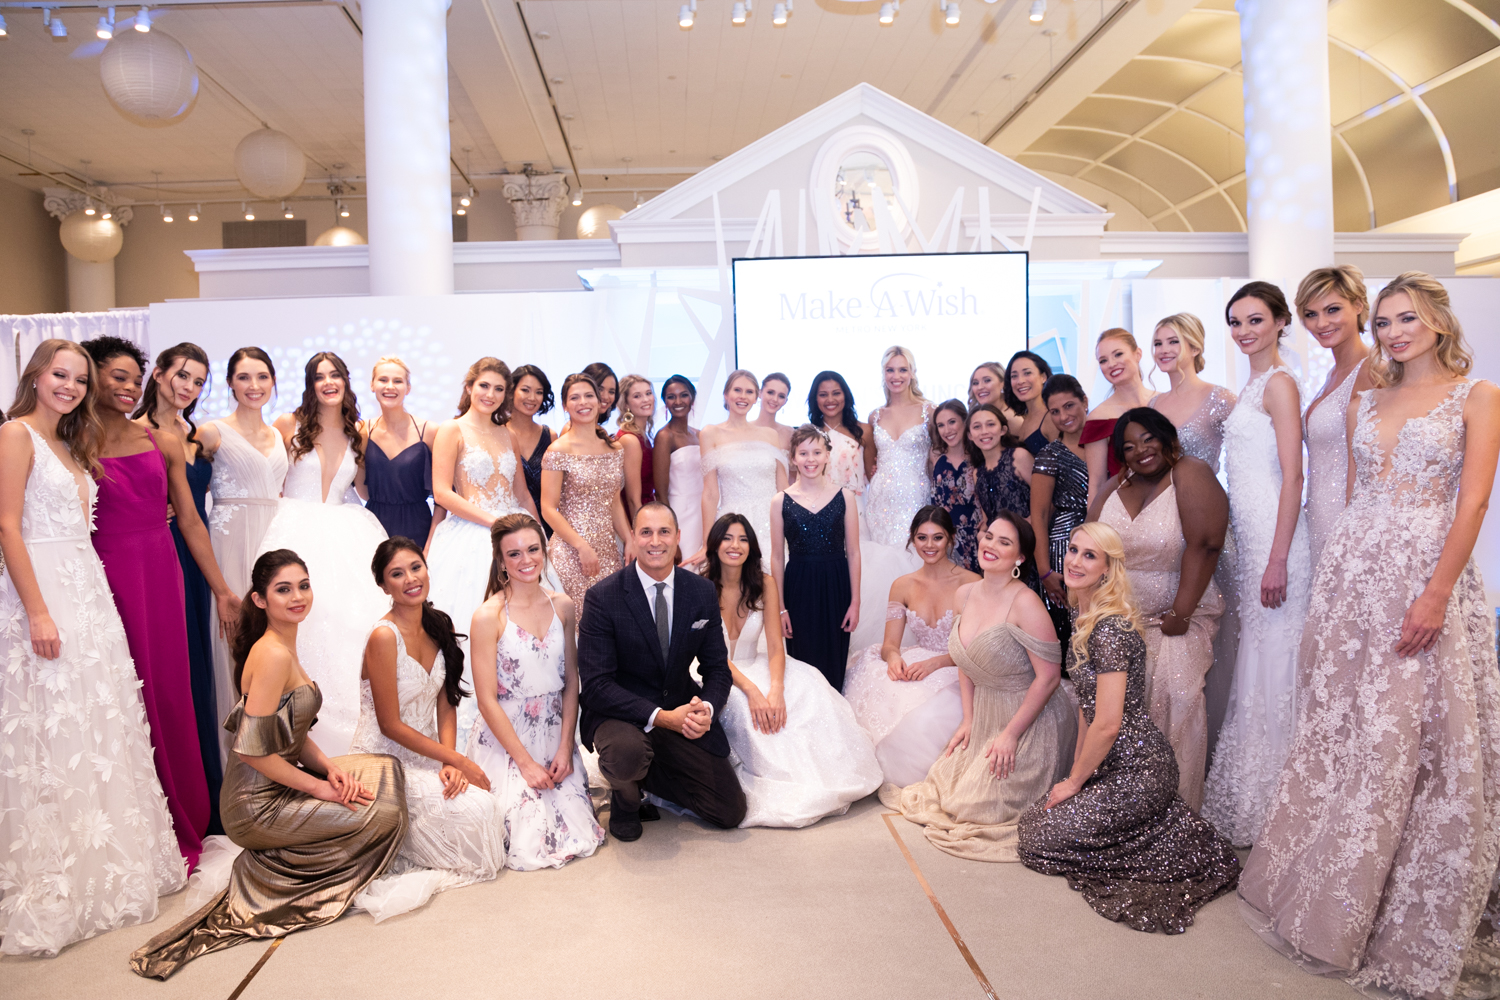 Kleinfeld Bridal, upscale bridal boutique and star of its own TV show, Say  Yes to the Dress. NYC Stock Photo - Alamy